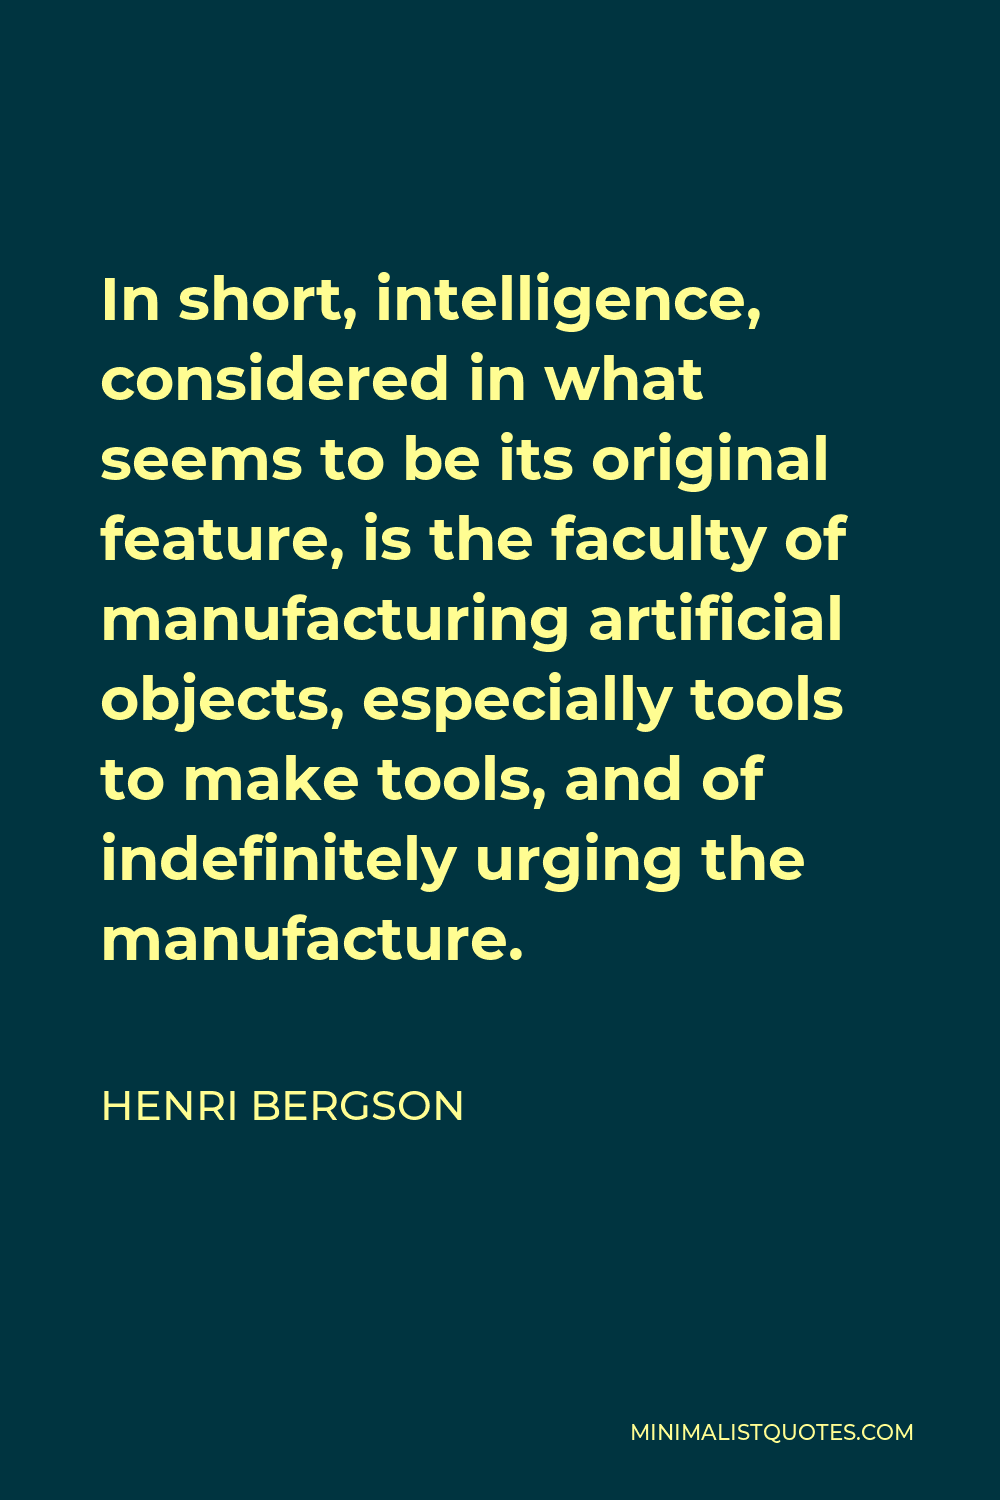 Henri Bergson Quote - In short, intelligence, considered in what seems to be its original feature, is the faculty of manufacturing artificial objects, especially tools to make tools, and of indefinitely urging the manufacture.